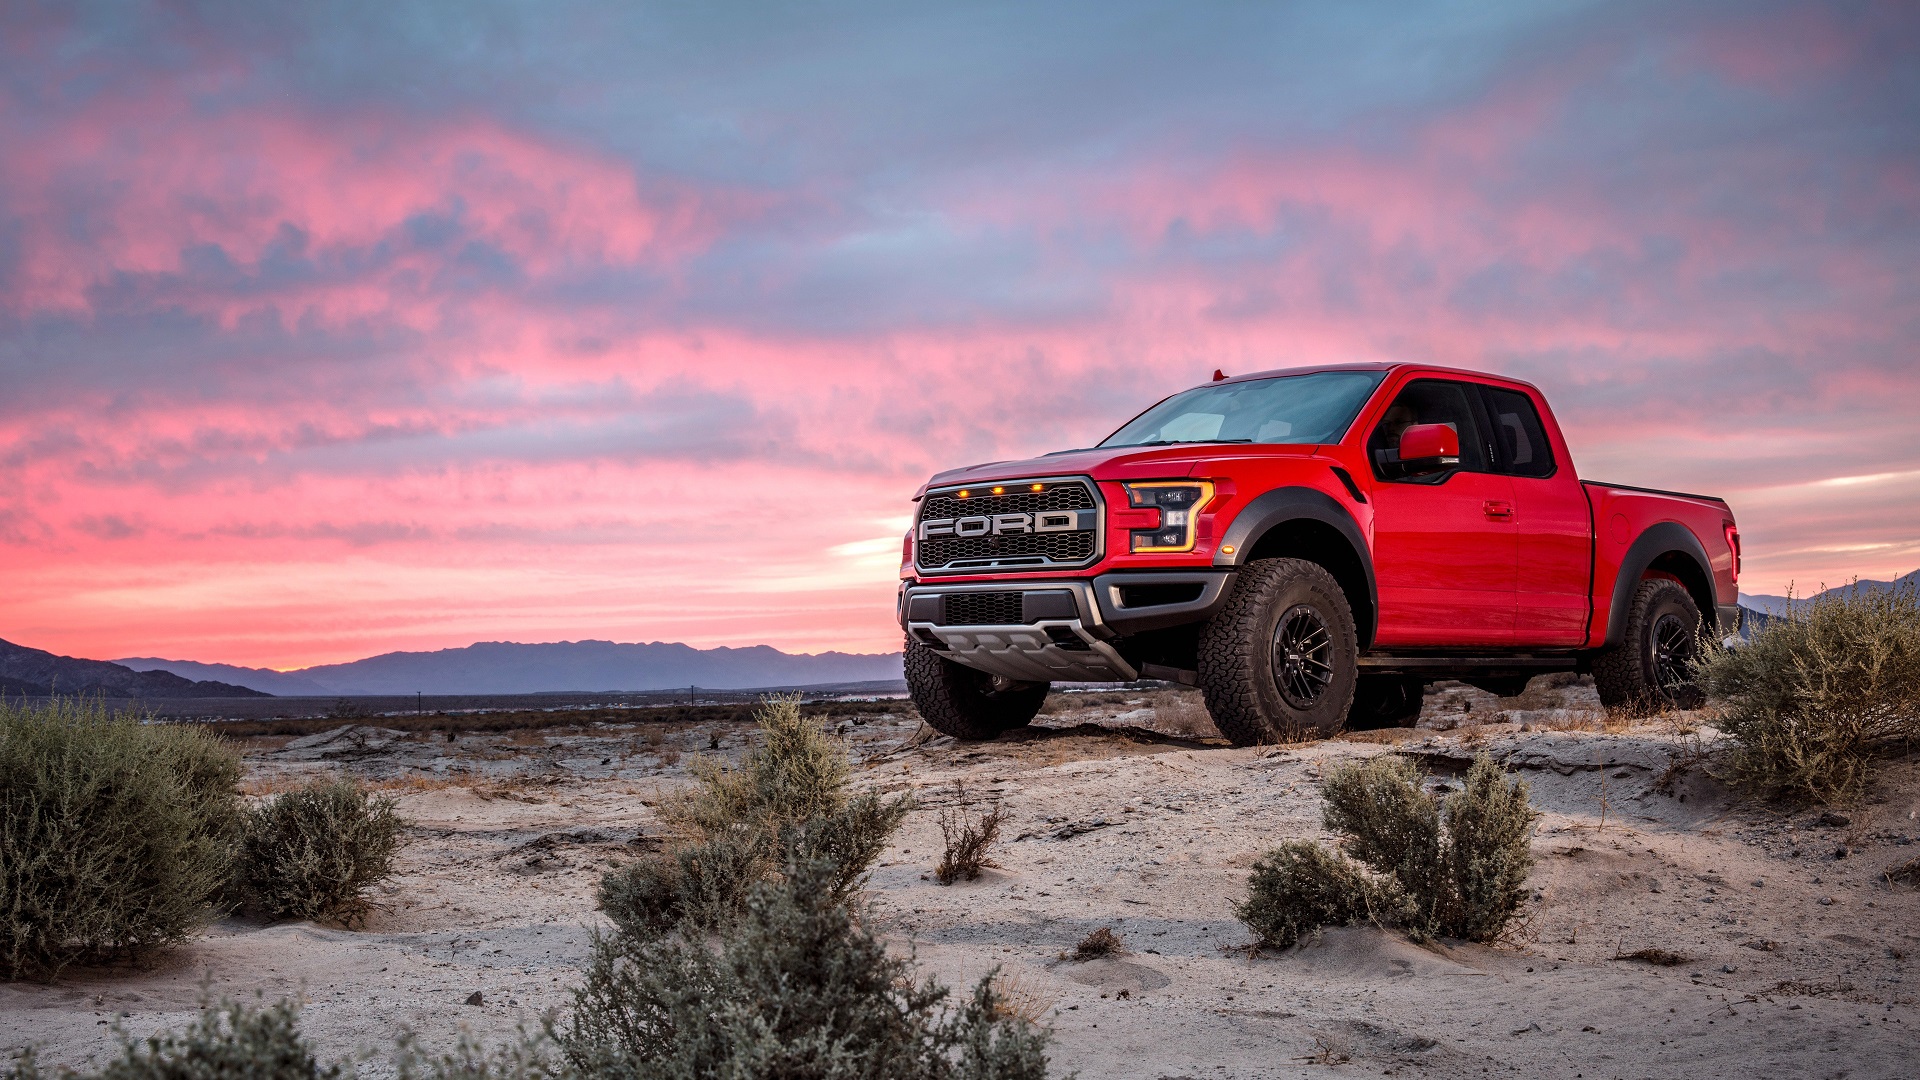 Ford Ford Raptor Ford F 150 Ford F 150 Raptor Car Pick Up Trucks Nature Sunset Red Cars 1920x1080